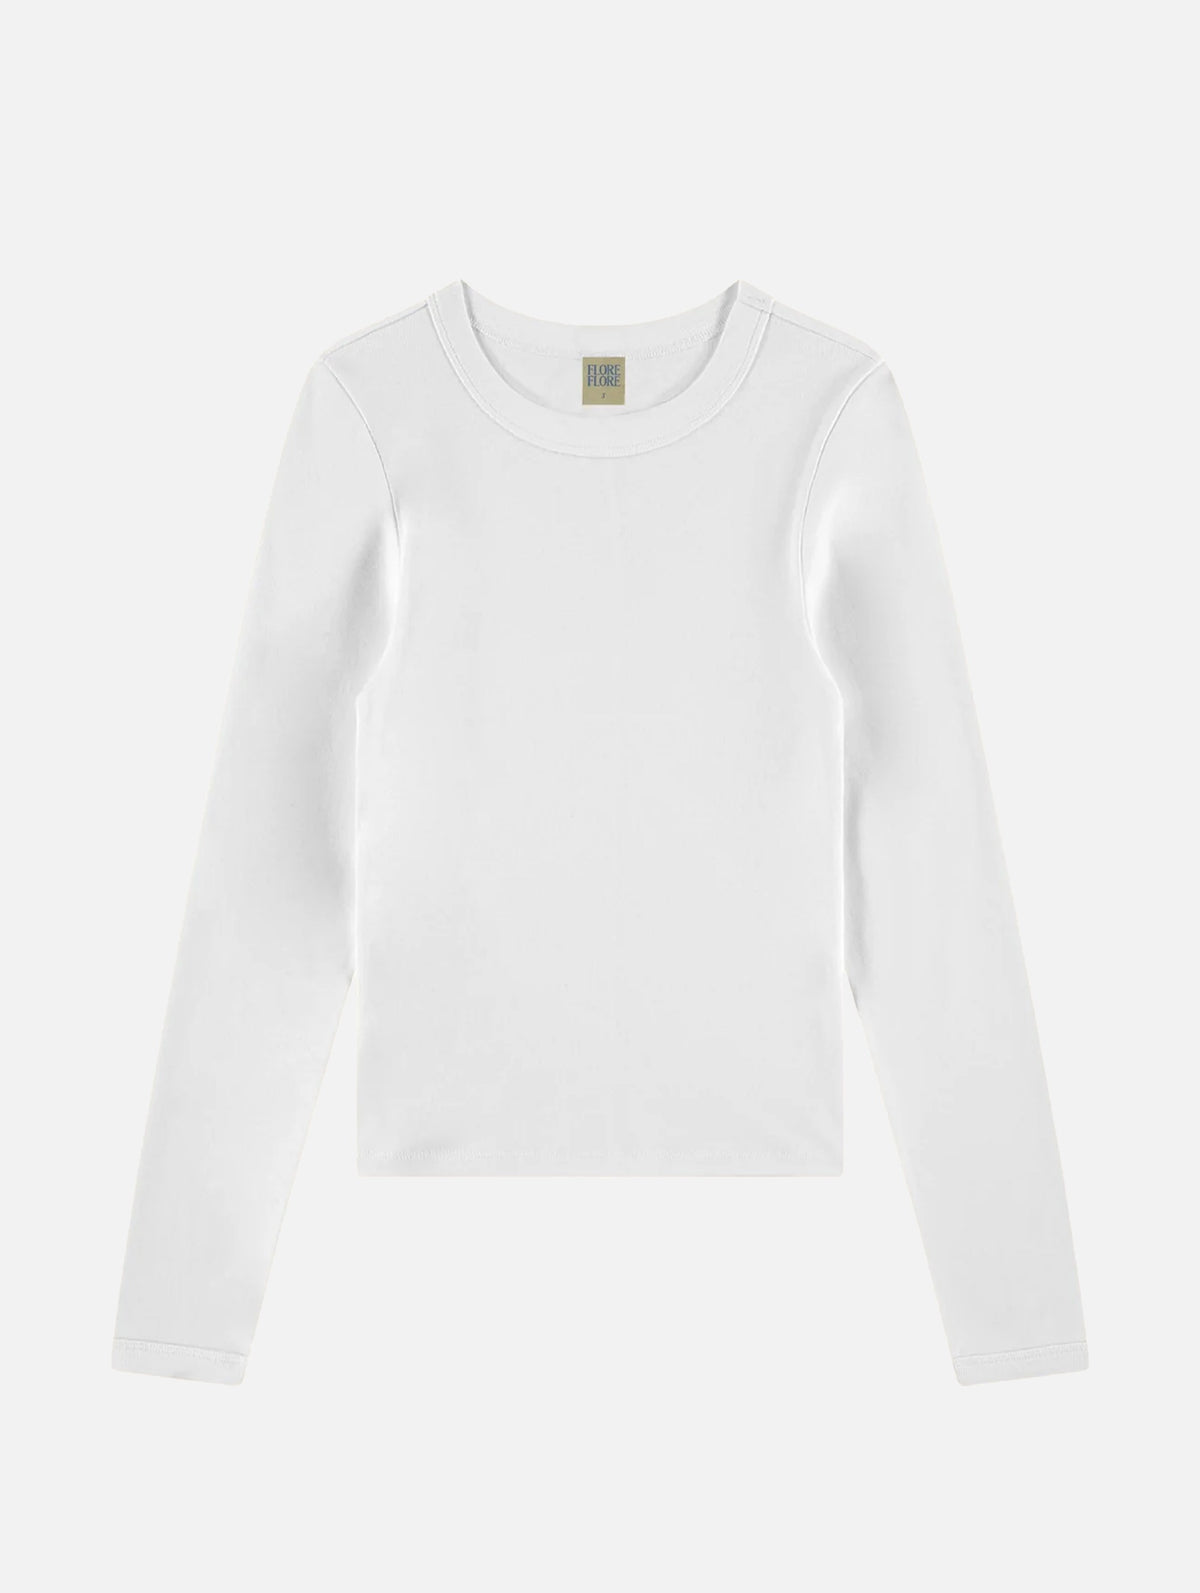 Max Long Sleeve Tee in White